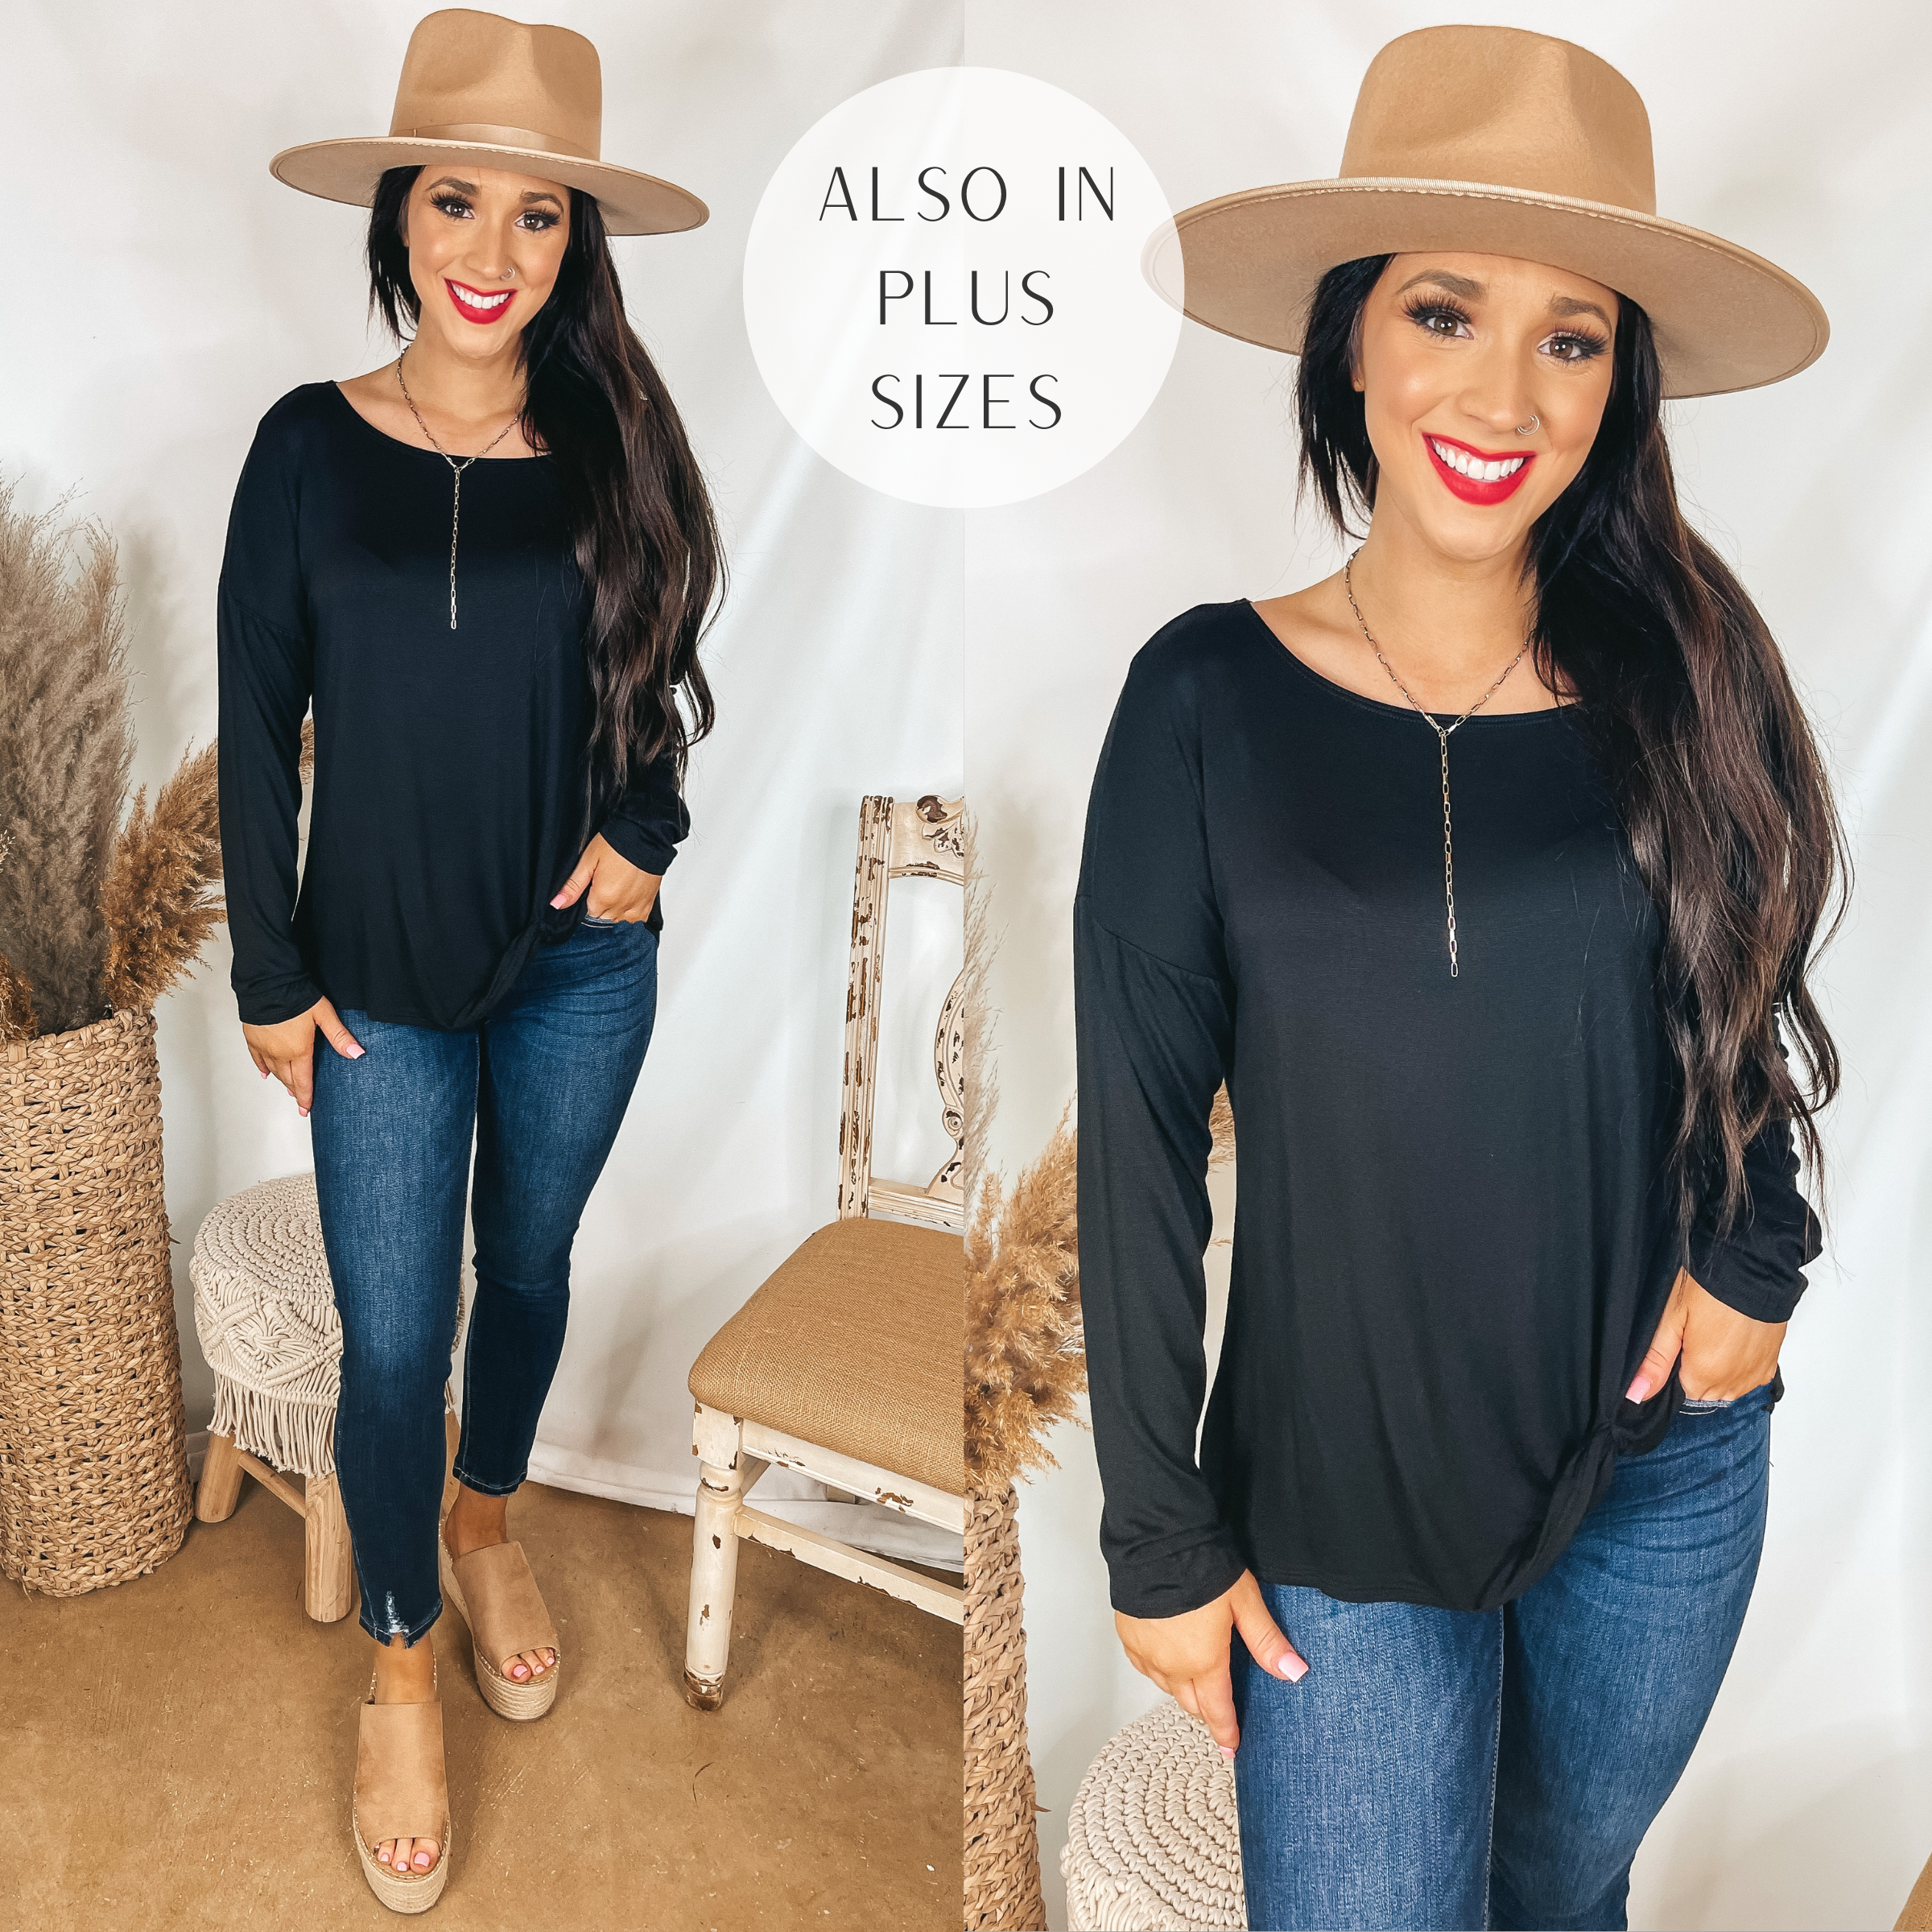 Model is wearing a black top that has long sleeves and a front knot. Model has it paired with dark wash skinny jeans, tan wedges, and a tan hat.